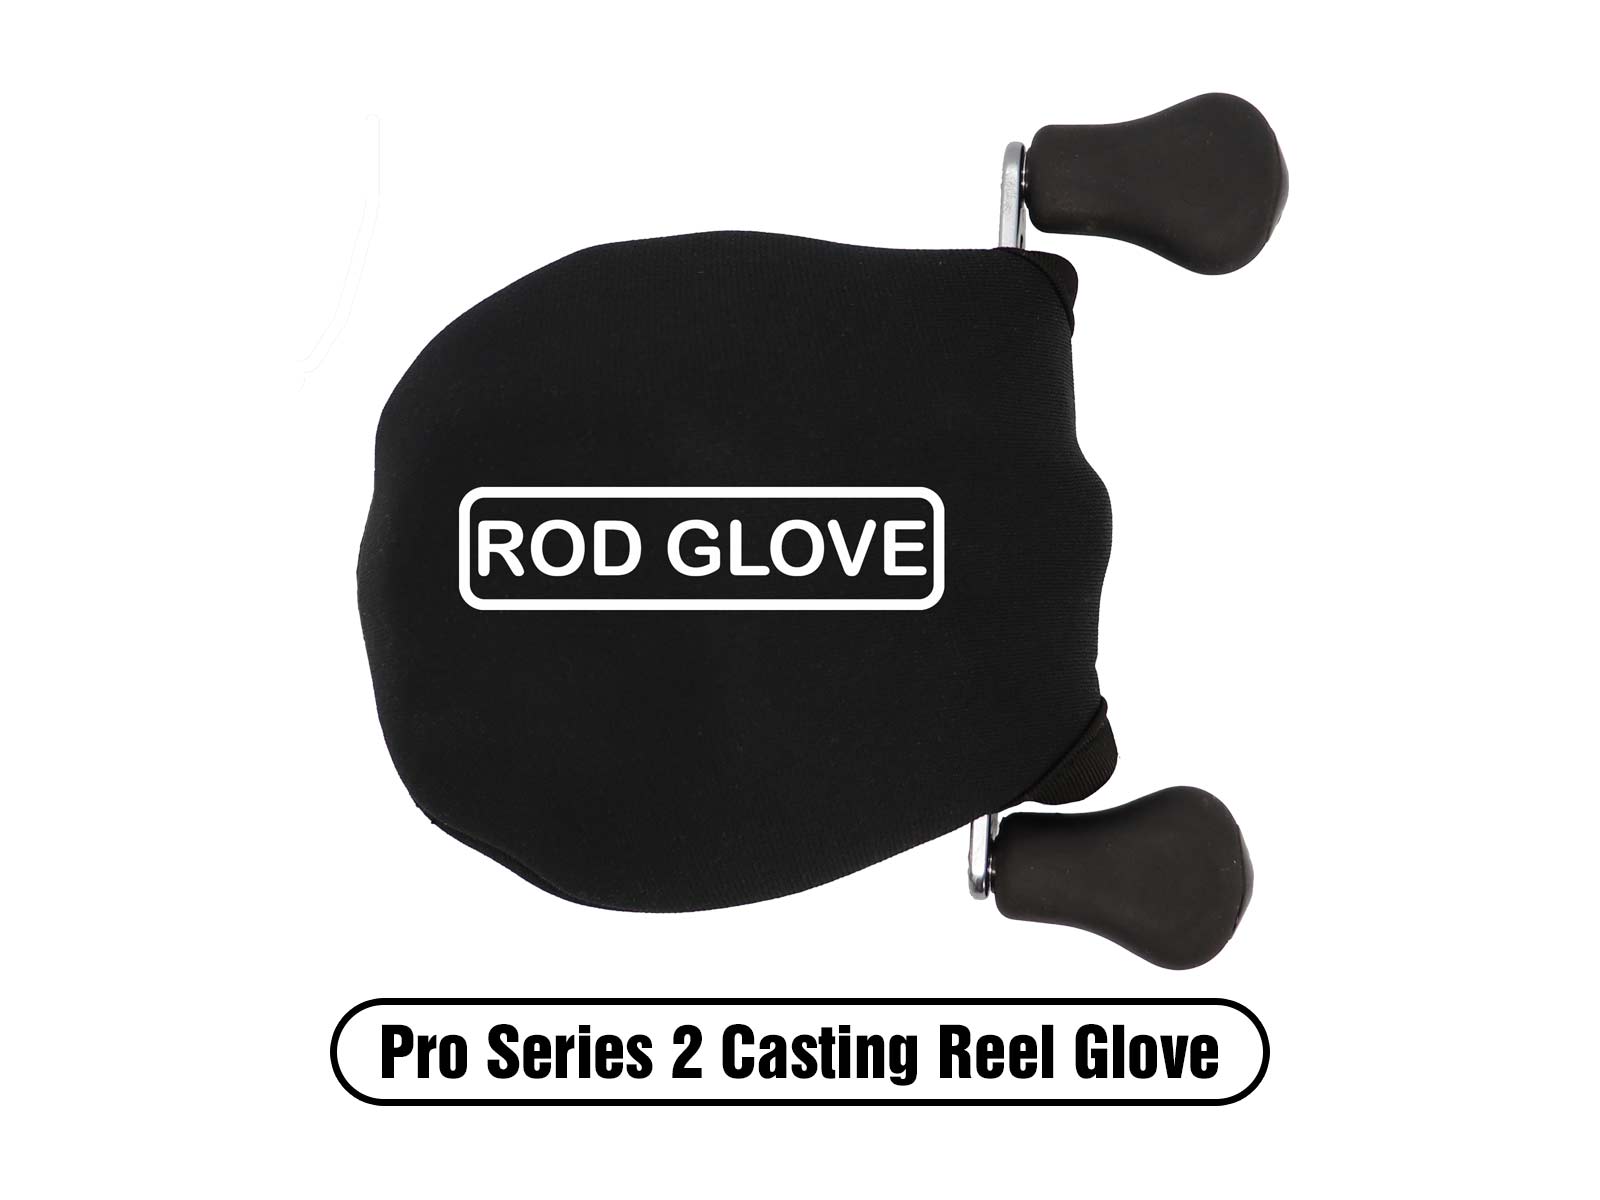 The Reel Glove - Casting PS2 – The Rod Glove